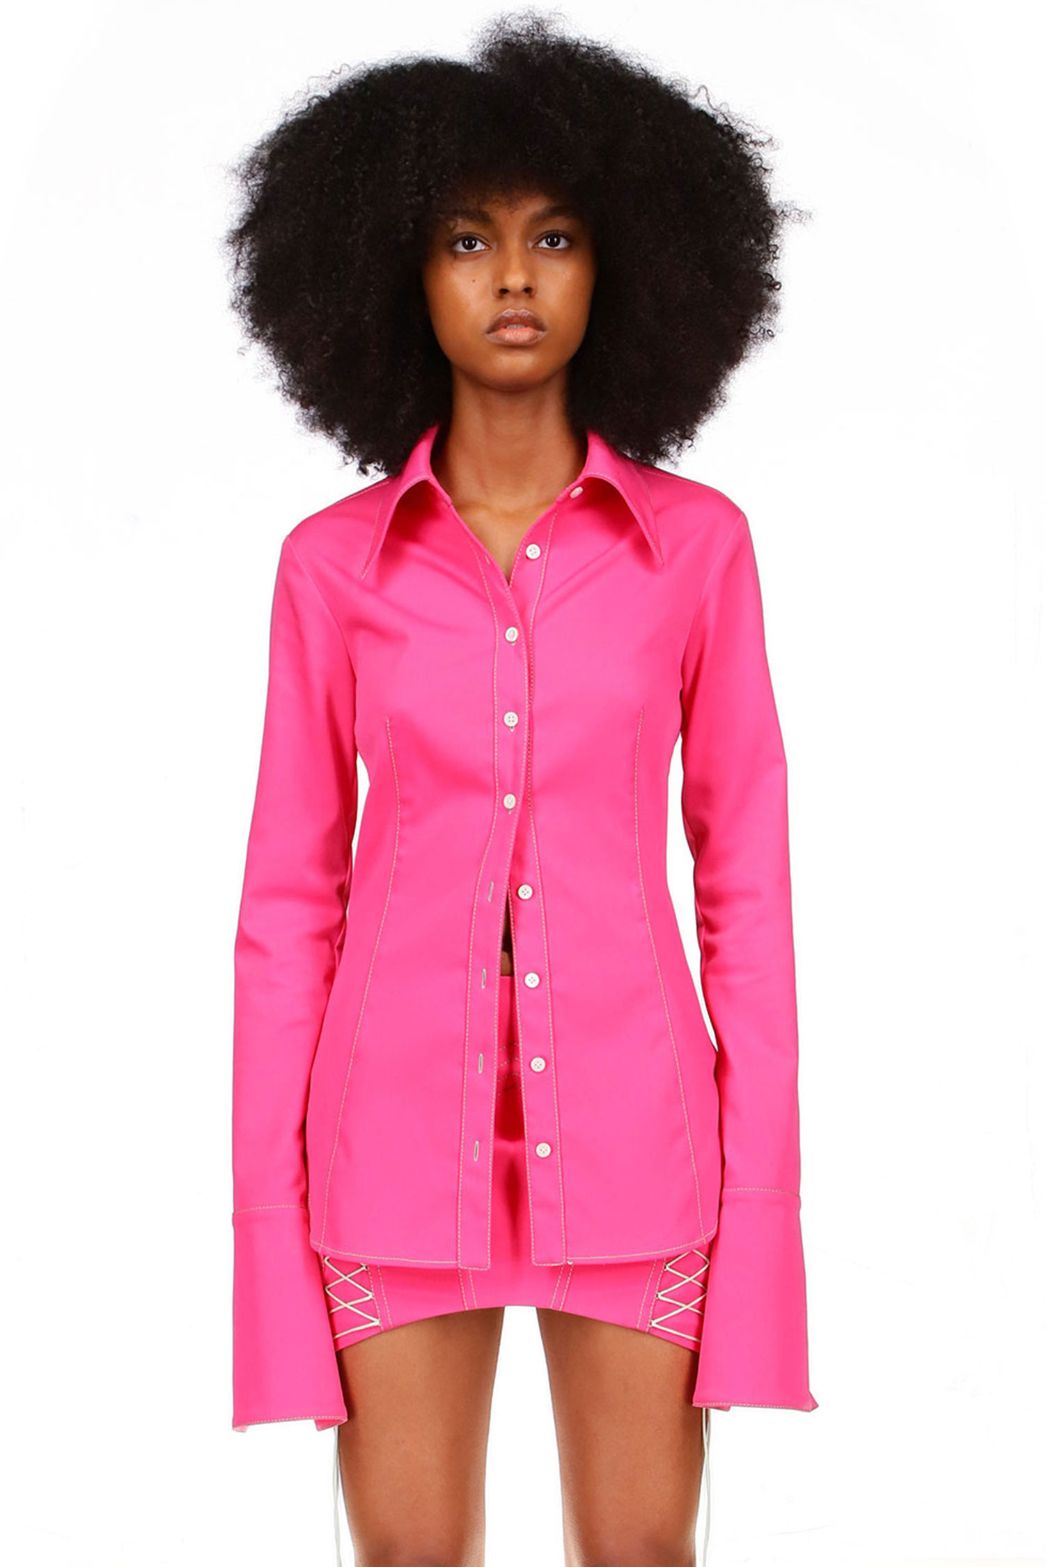 Hot Pink Fitted Button Down Shirt